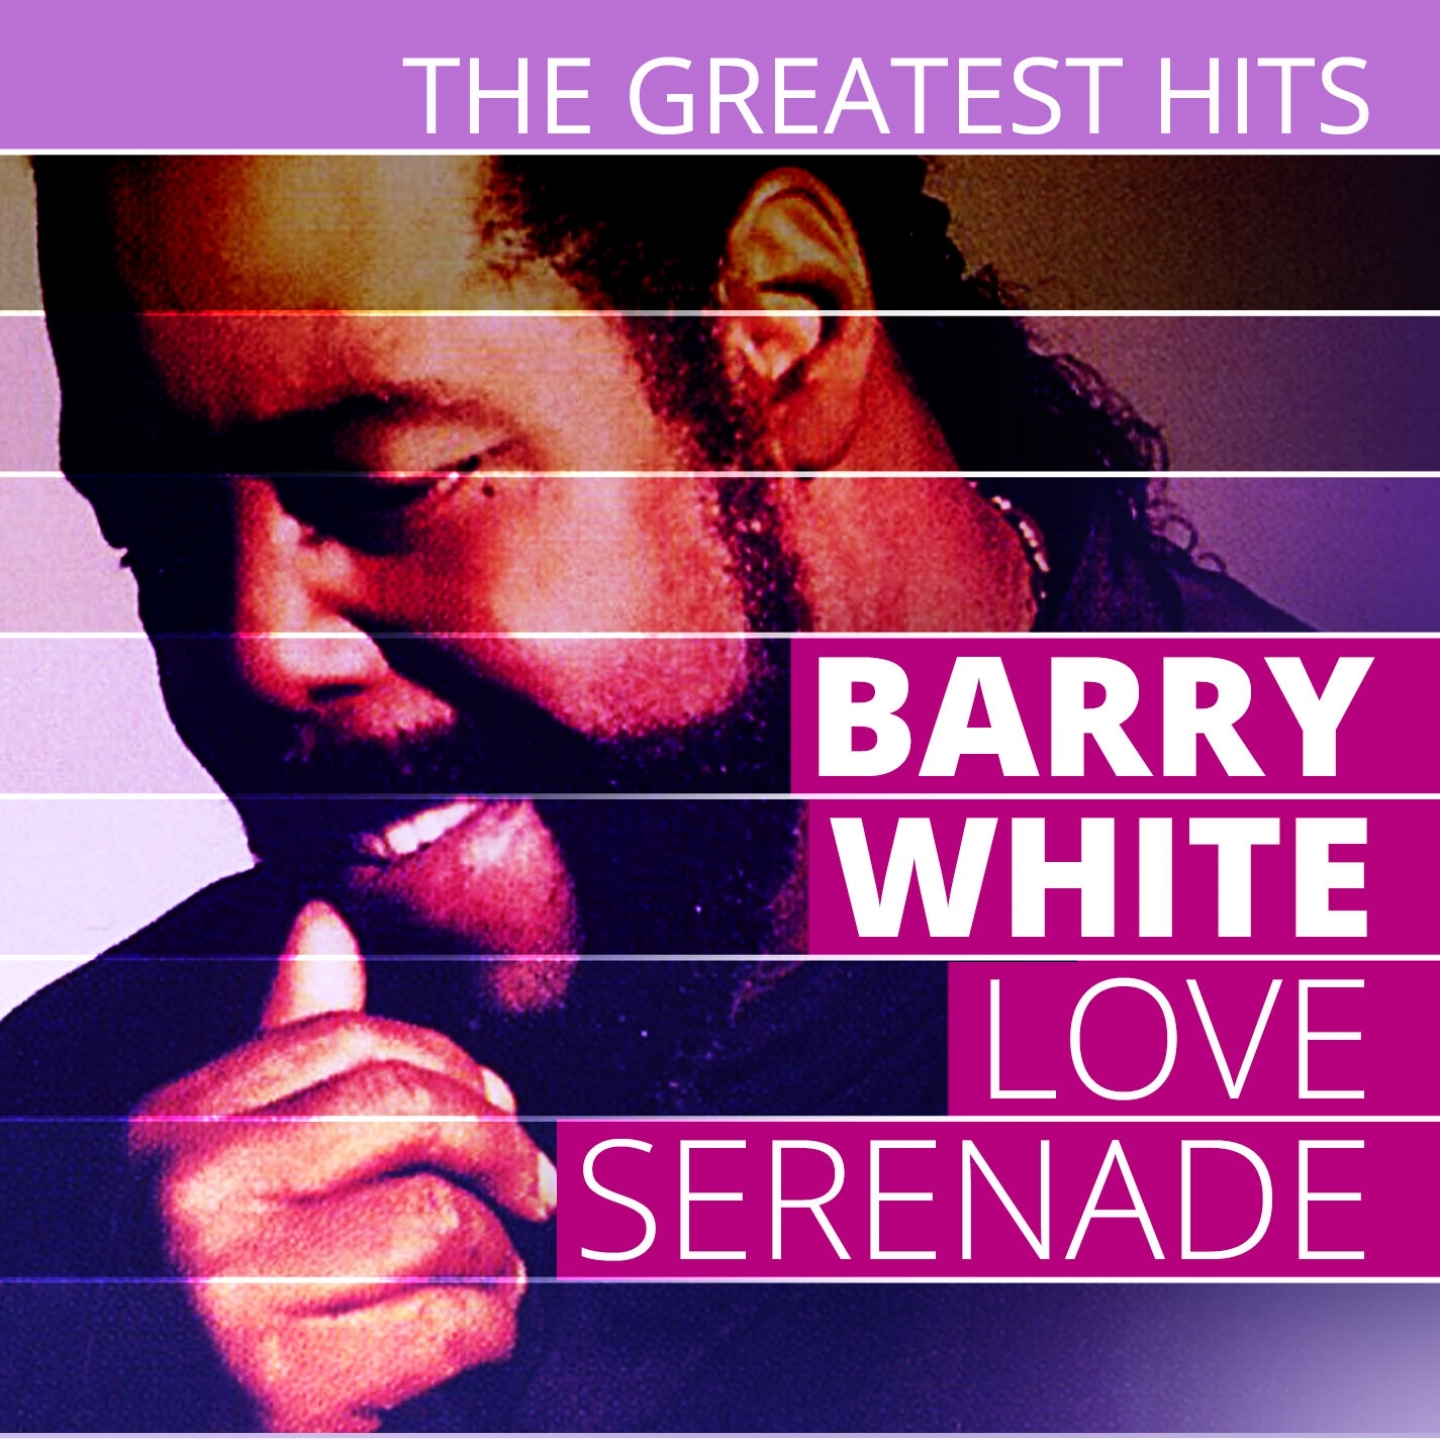 THE GREATEST HITS: Barry White - Love Serenade